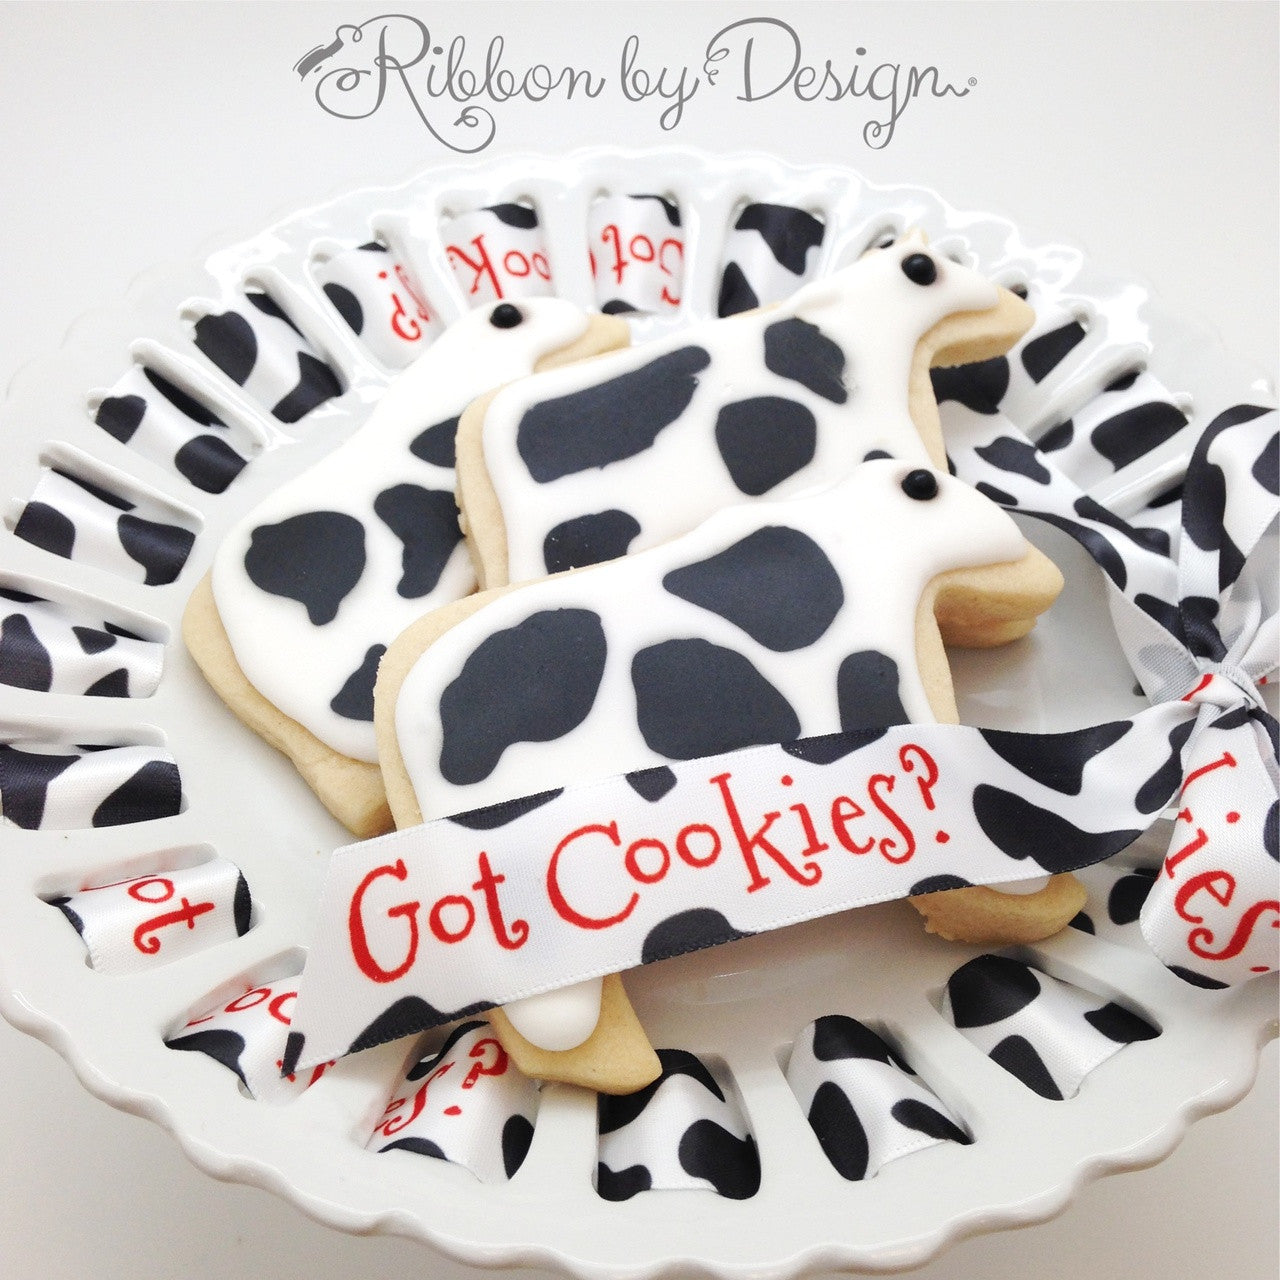 Got Cookies? Ribbon with Black and White Cow Pattern on 7/8" White Single Face Satin Ribbon